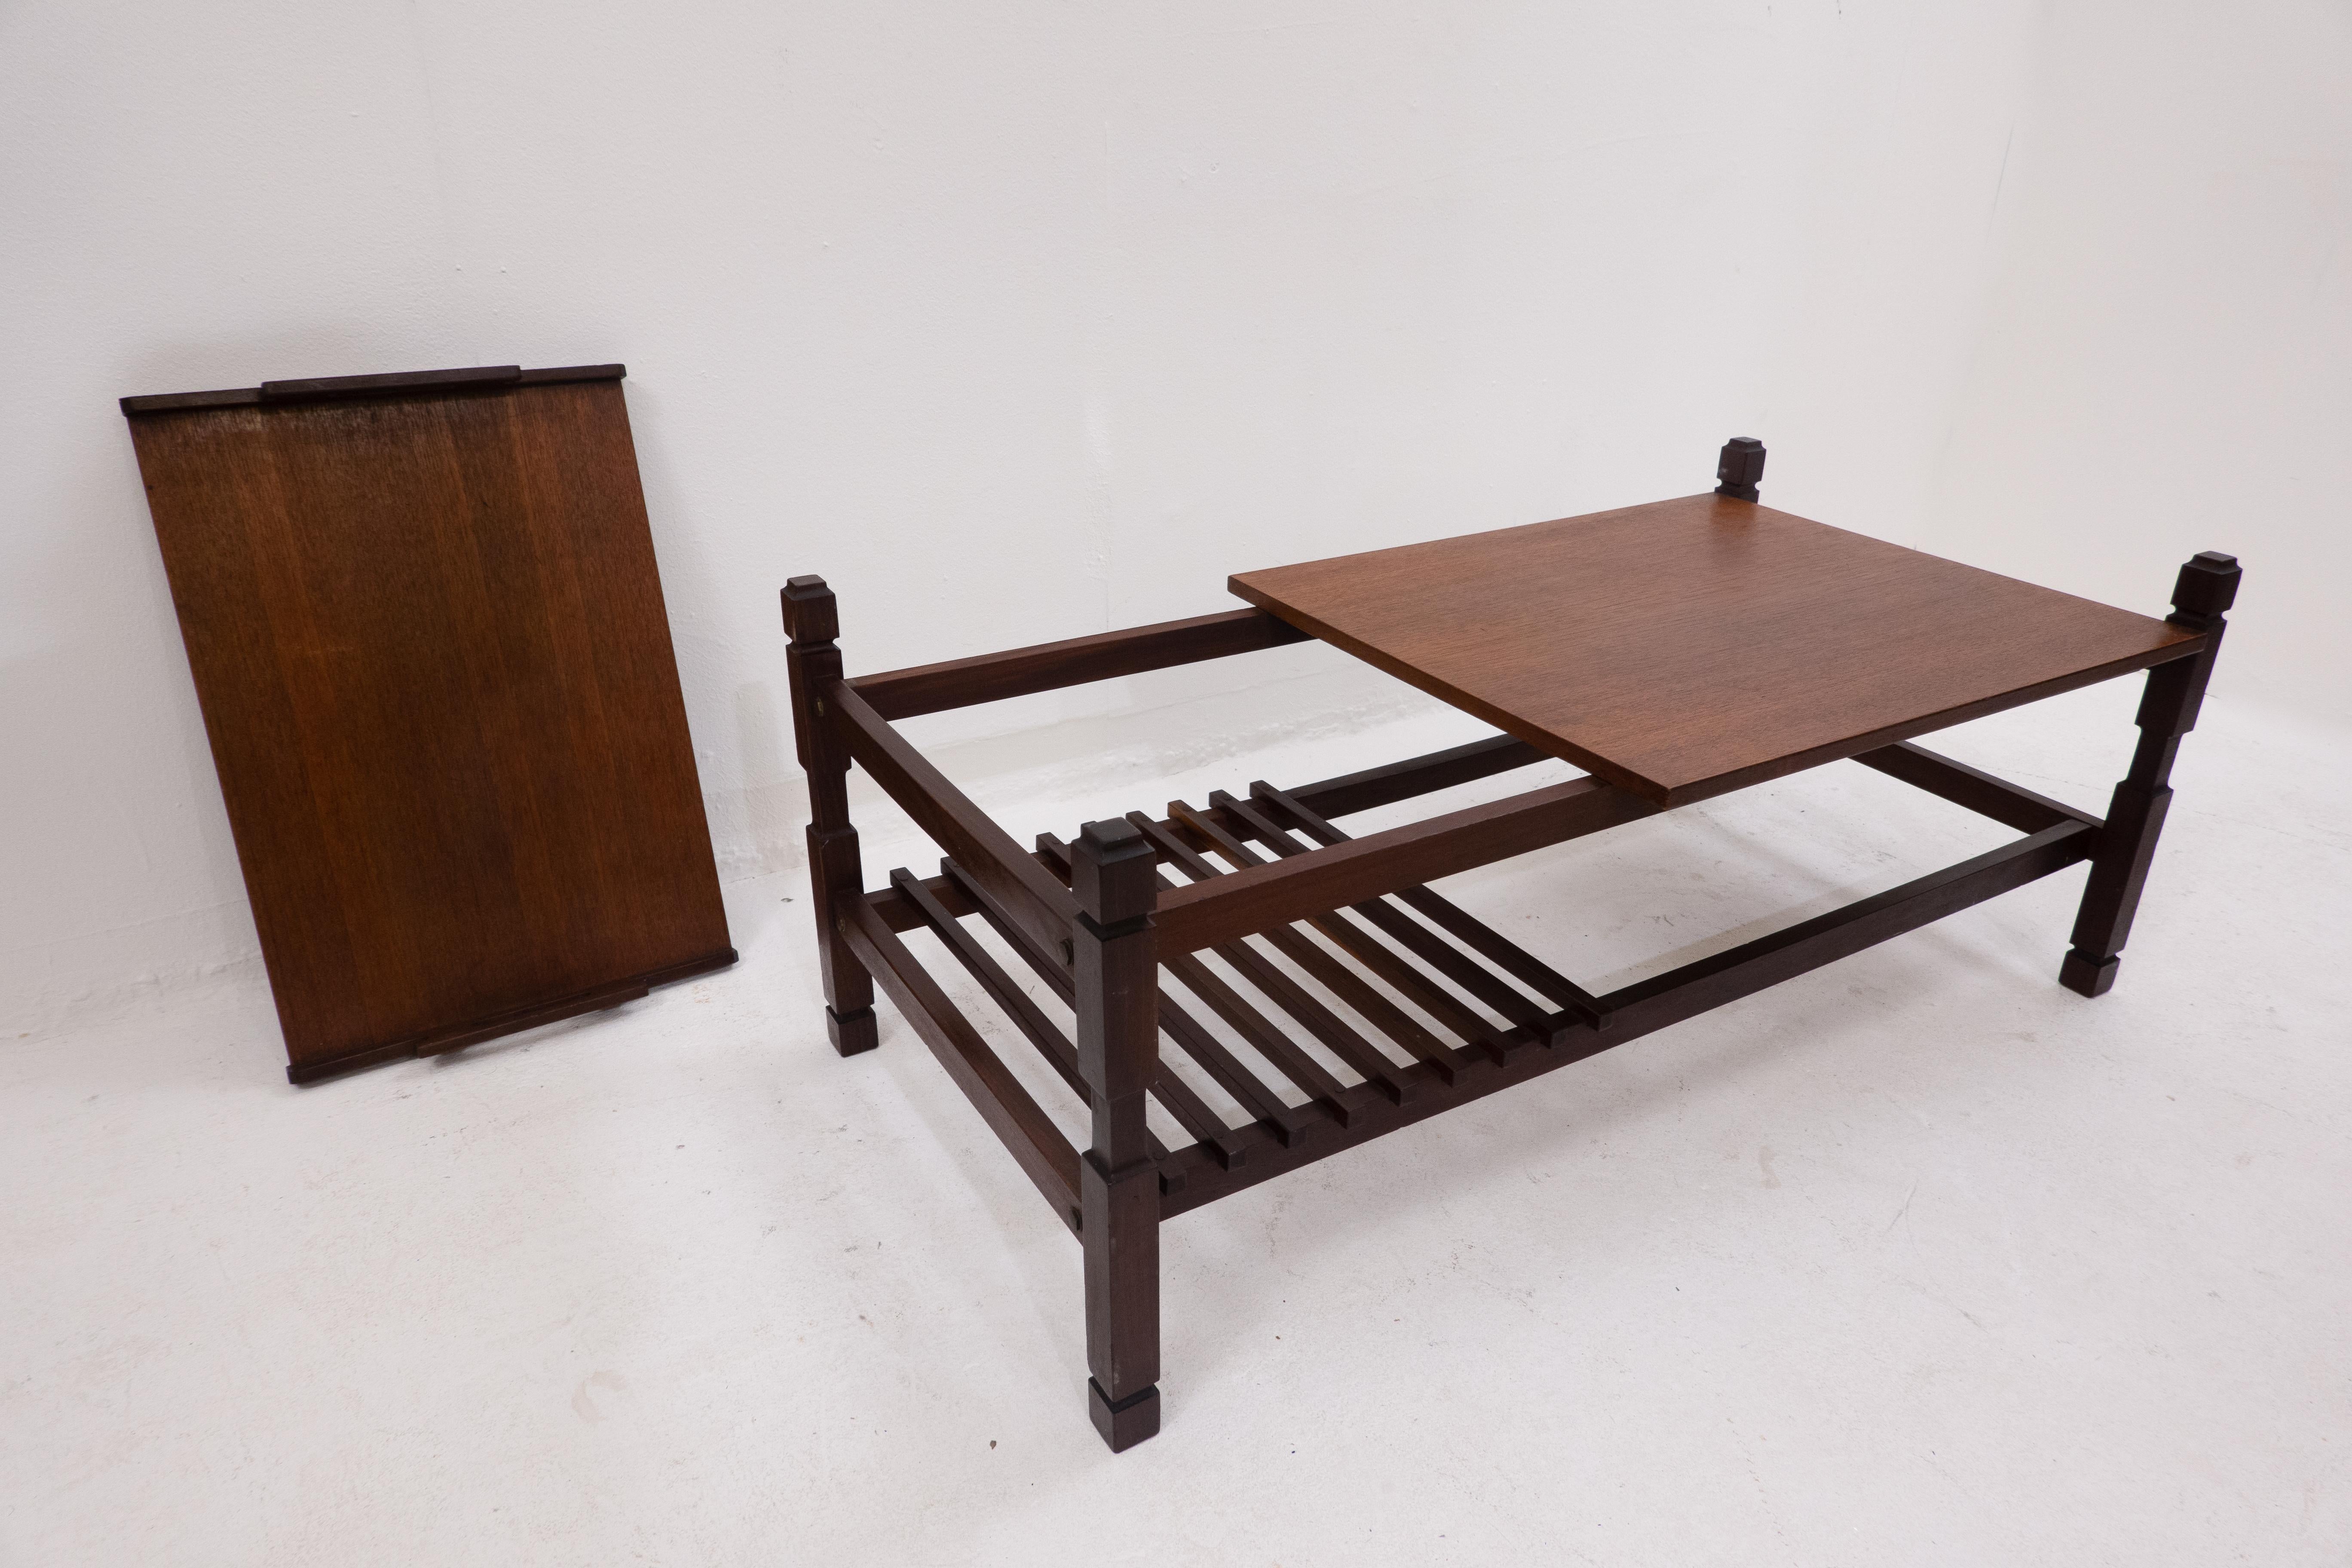 Italian Mid-Century Wooden Coffee Table with Removable Tray, Italy, 1960s For Sale